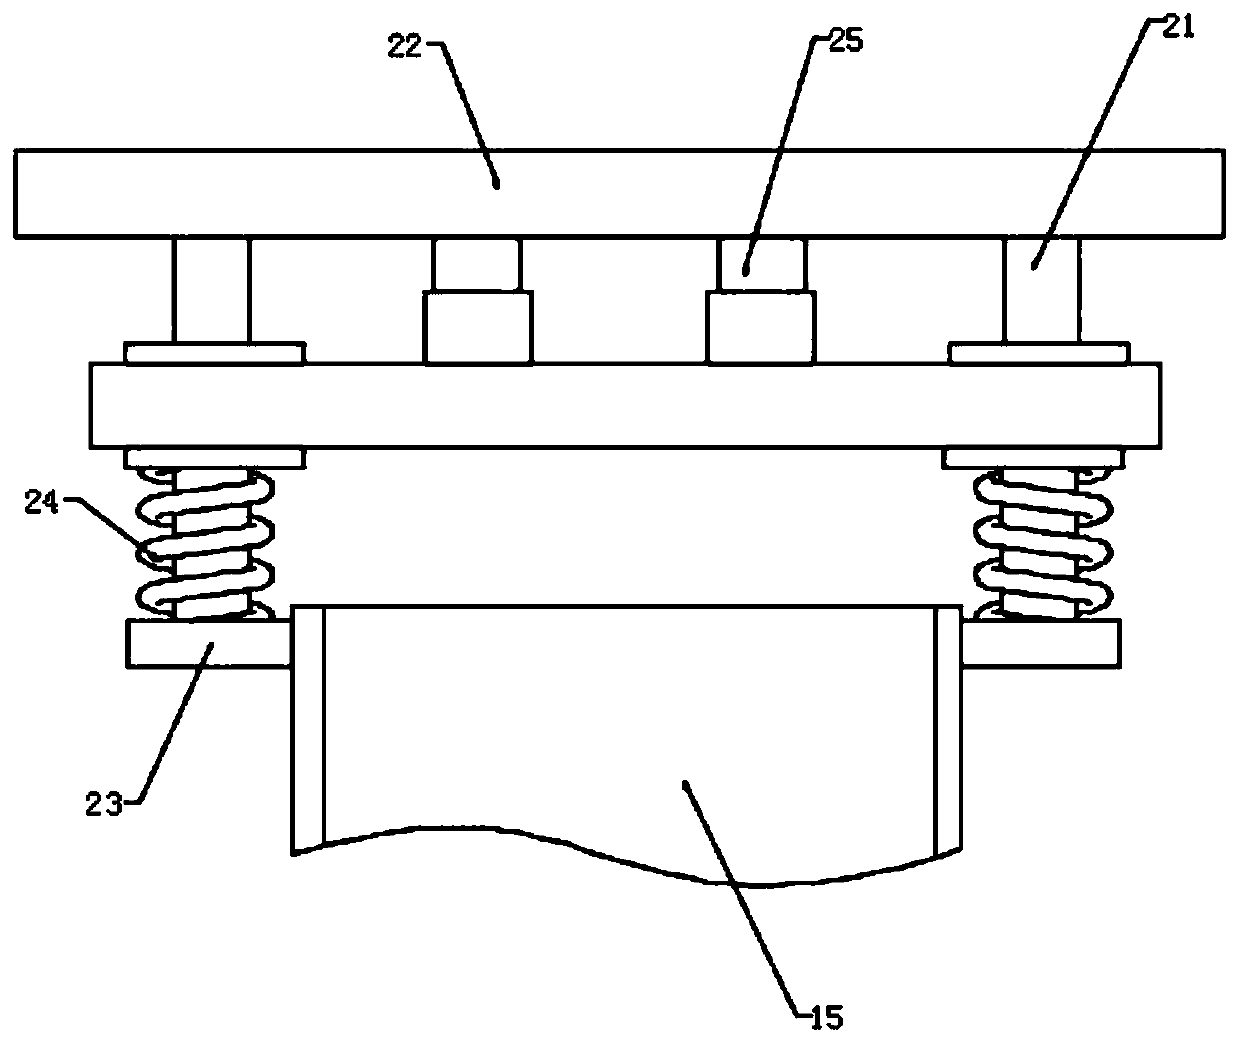 Gcluing device for textiles